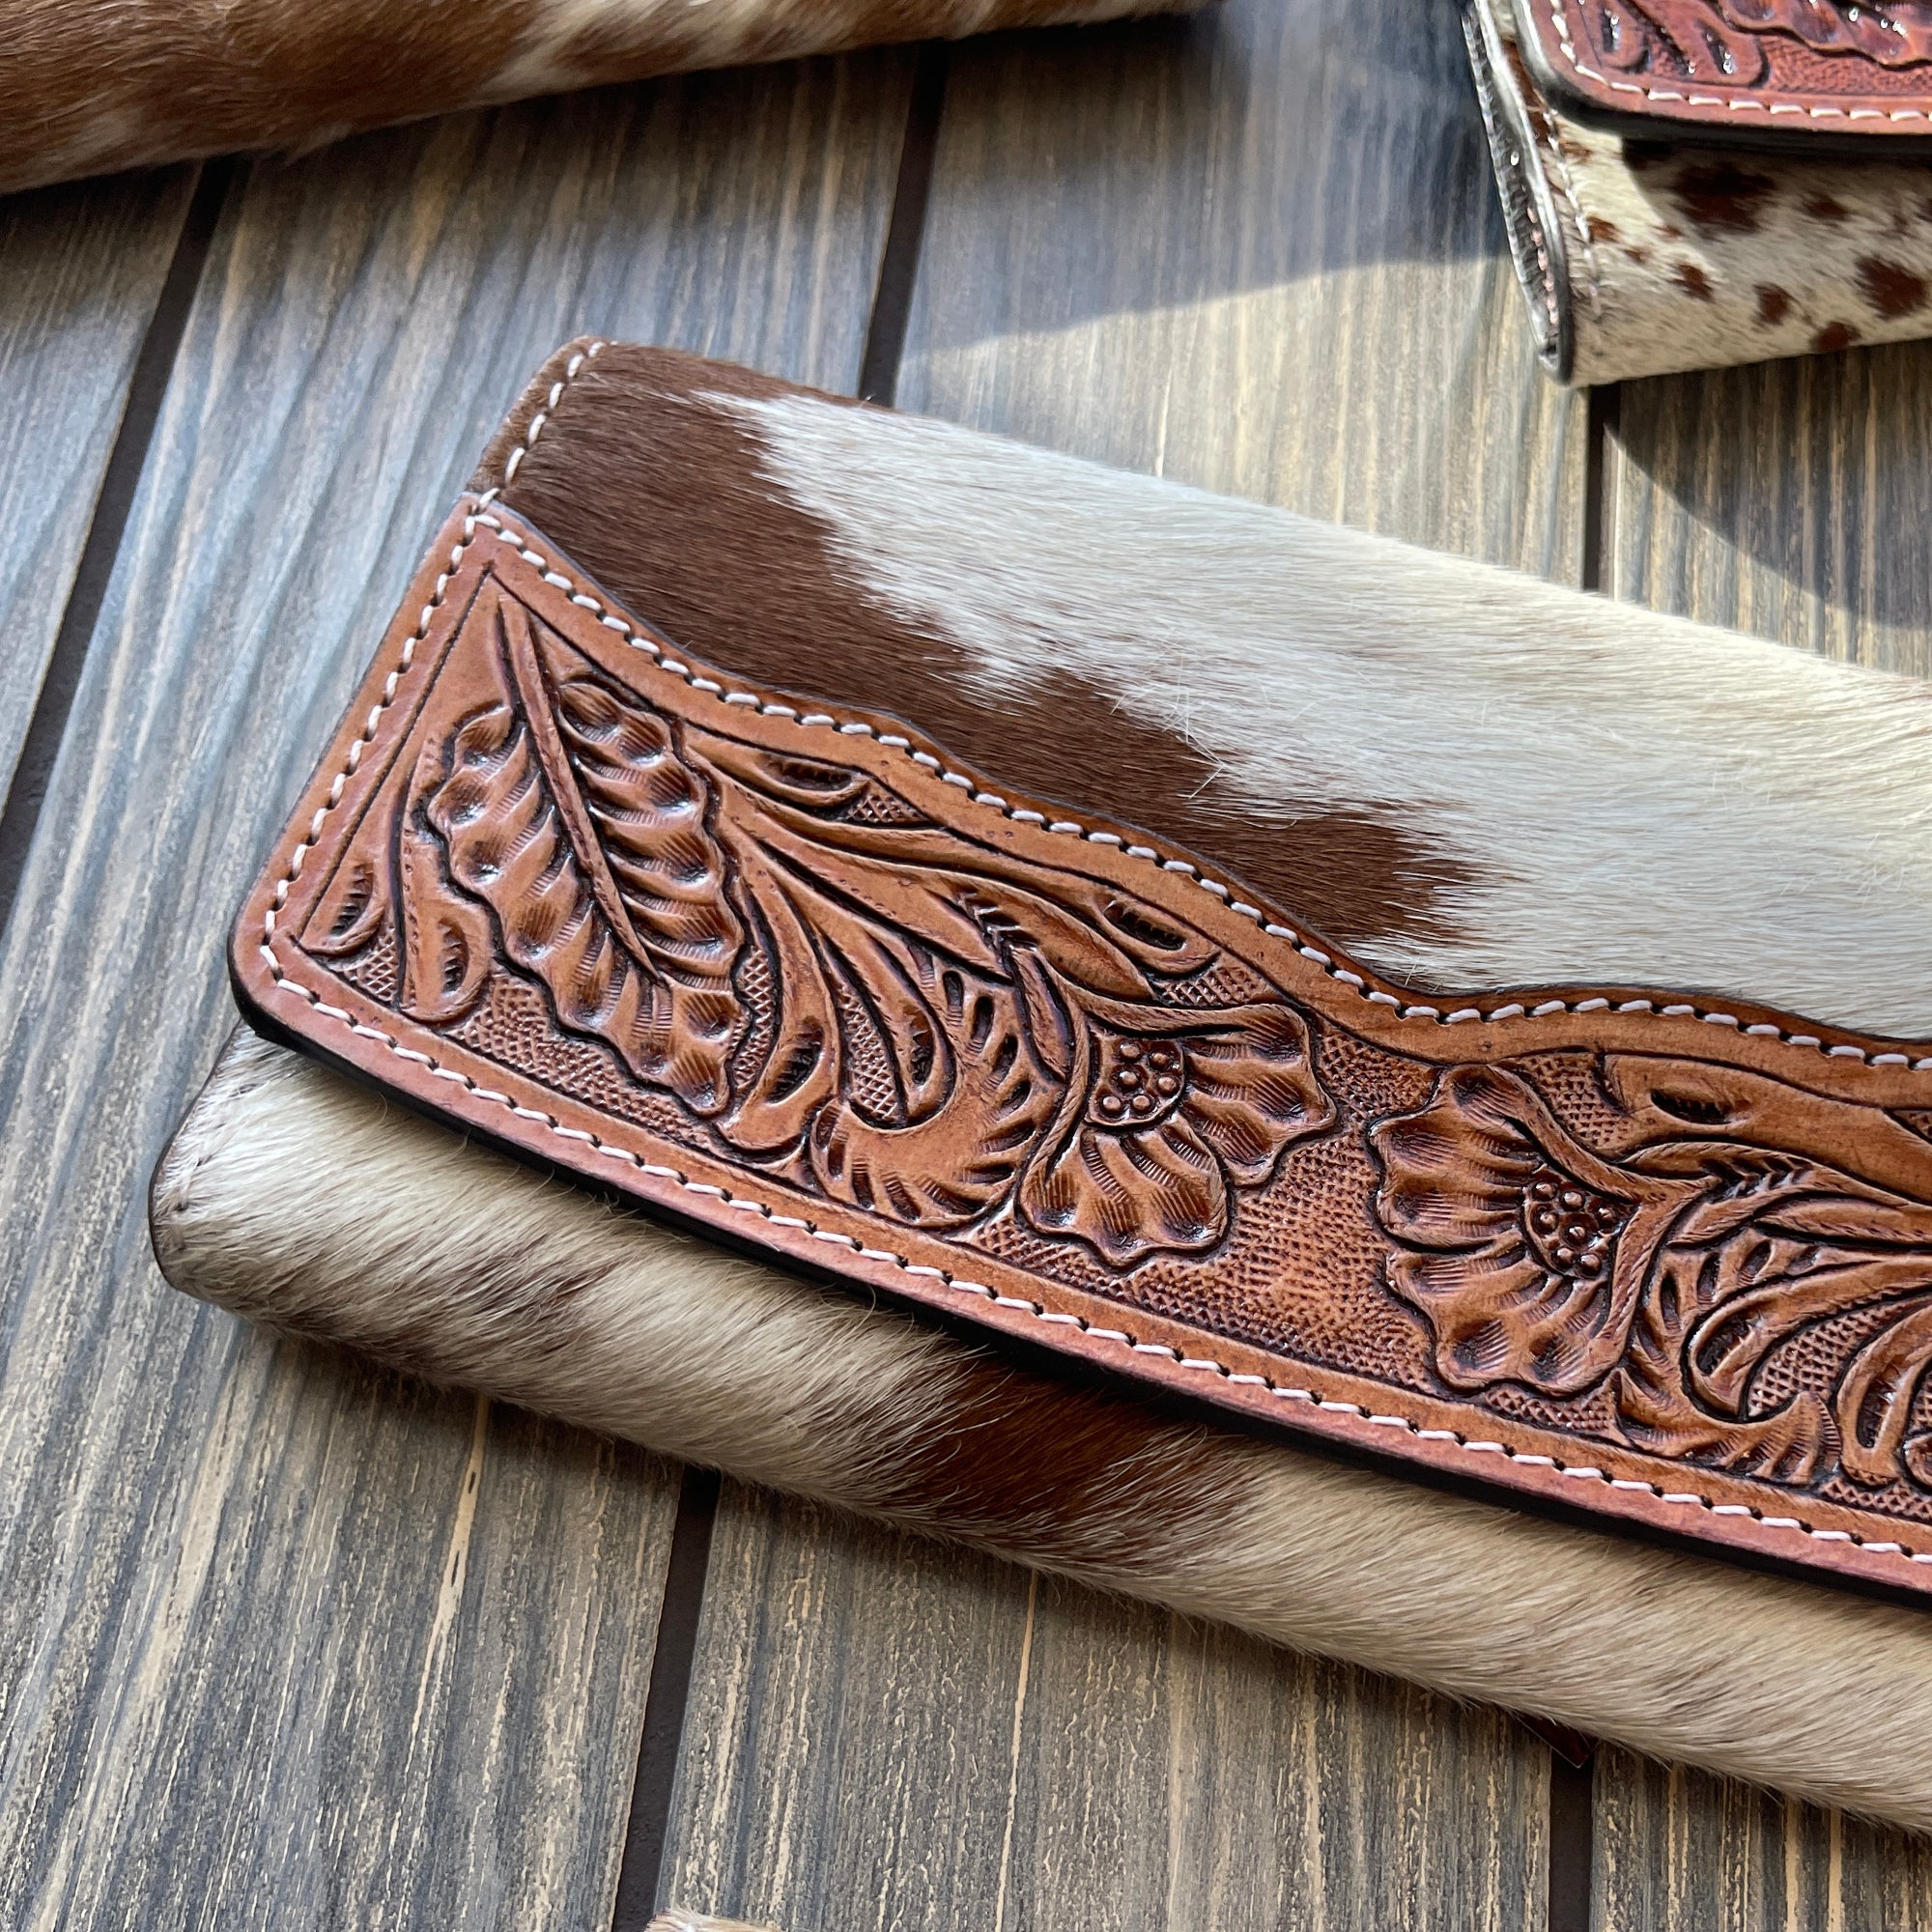 Hand Tooled Leather Cowhide Women's Wallet